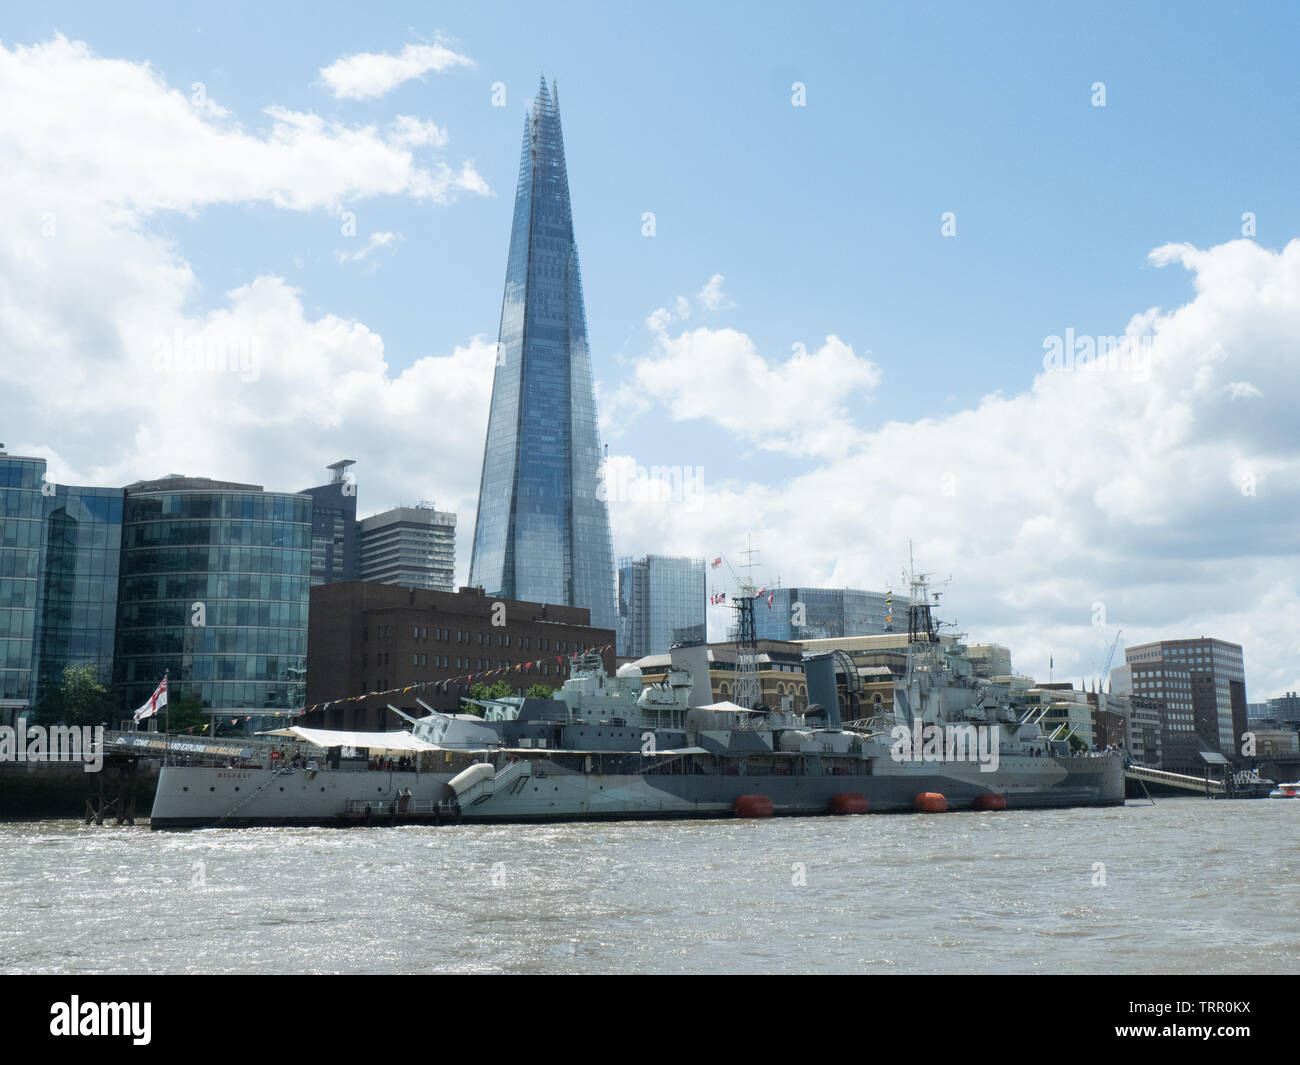 HMS Belfast on the River Thames, seen from the river at high tide Stock Photo